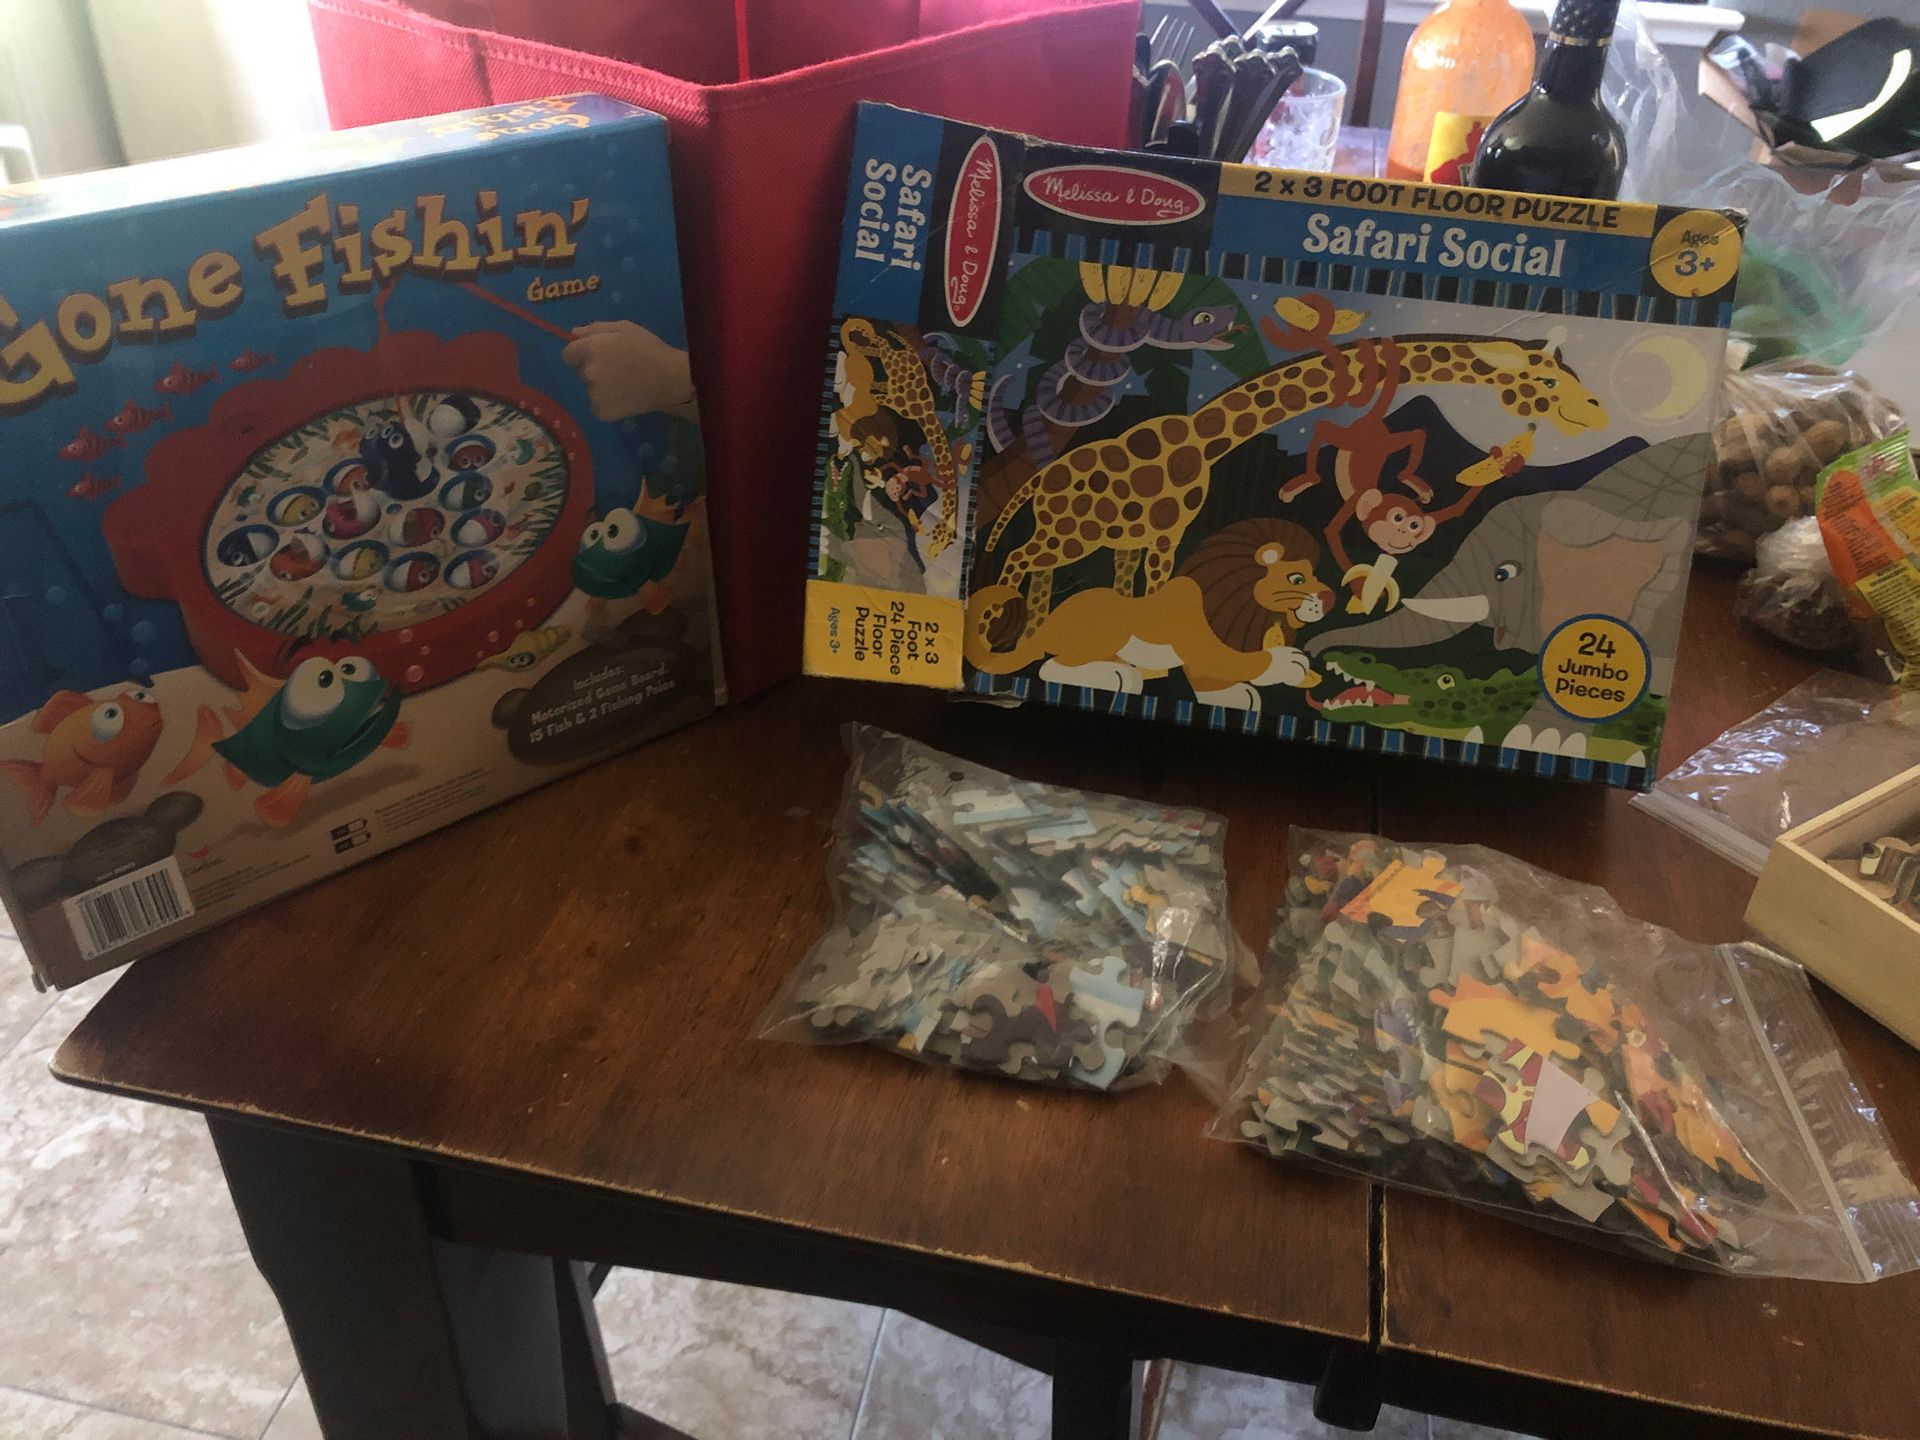 Gone fishing game and 3 puzzles